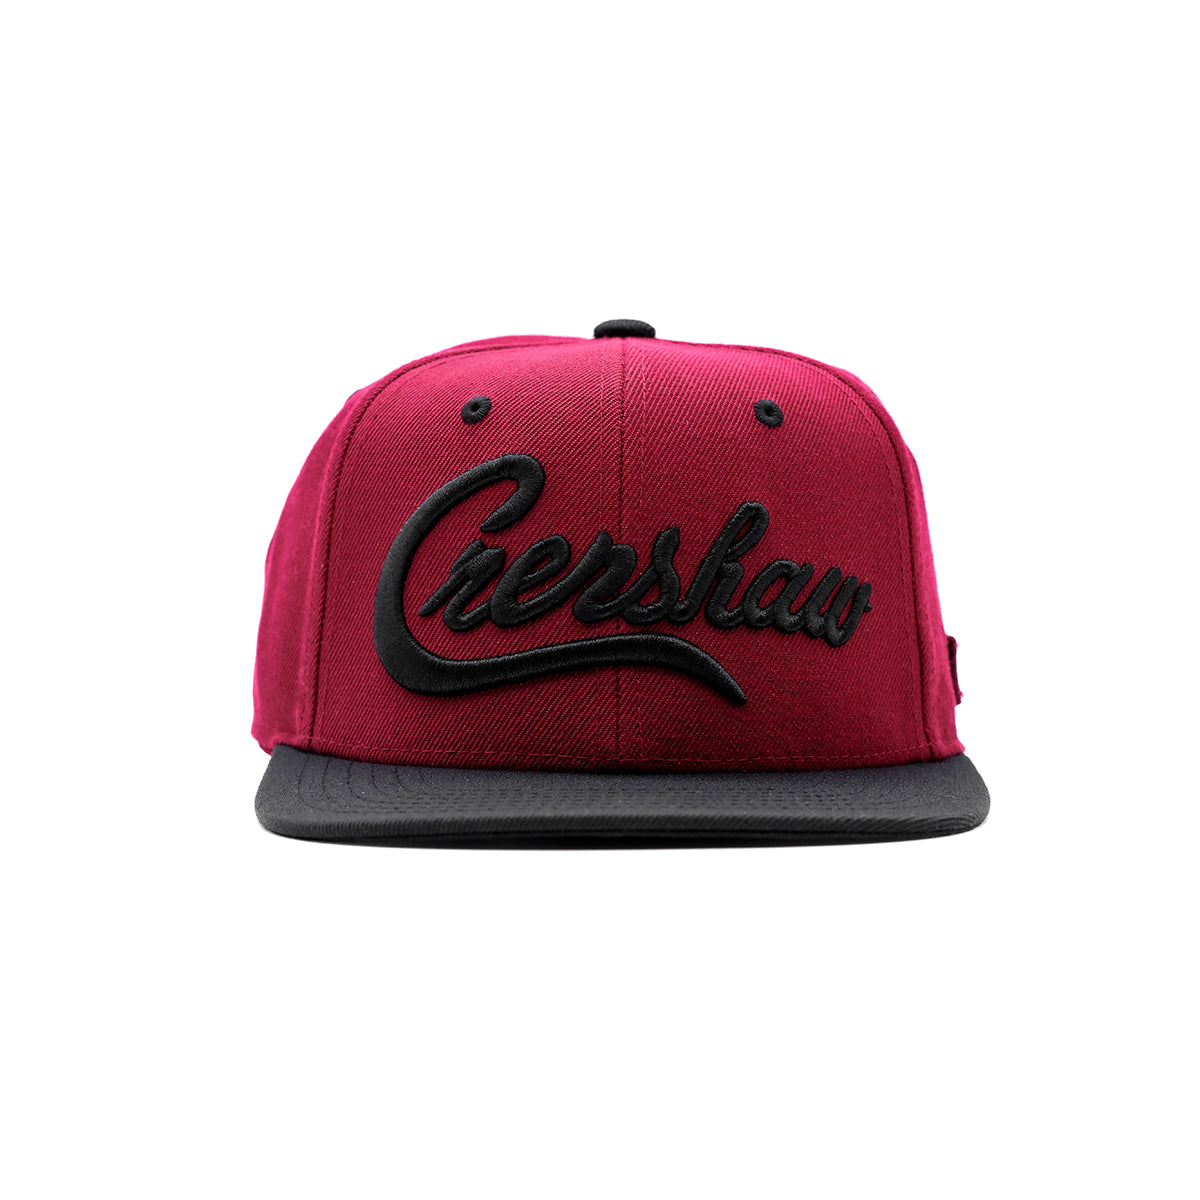 Crenshaw Limited Edition Snapback - Burgundy/Black [Two-Tone] - Front